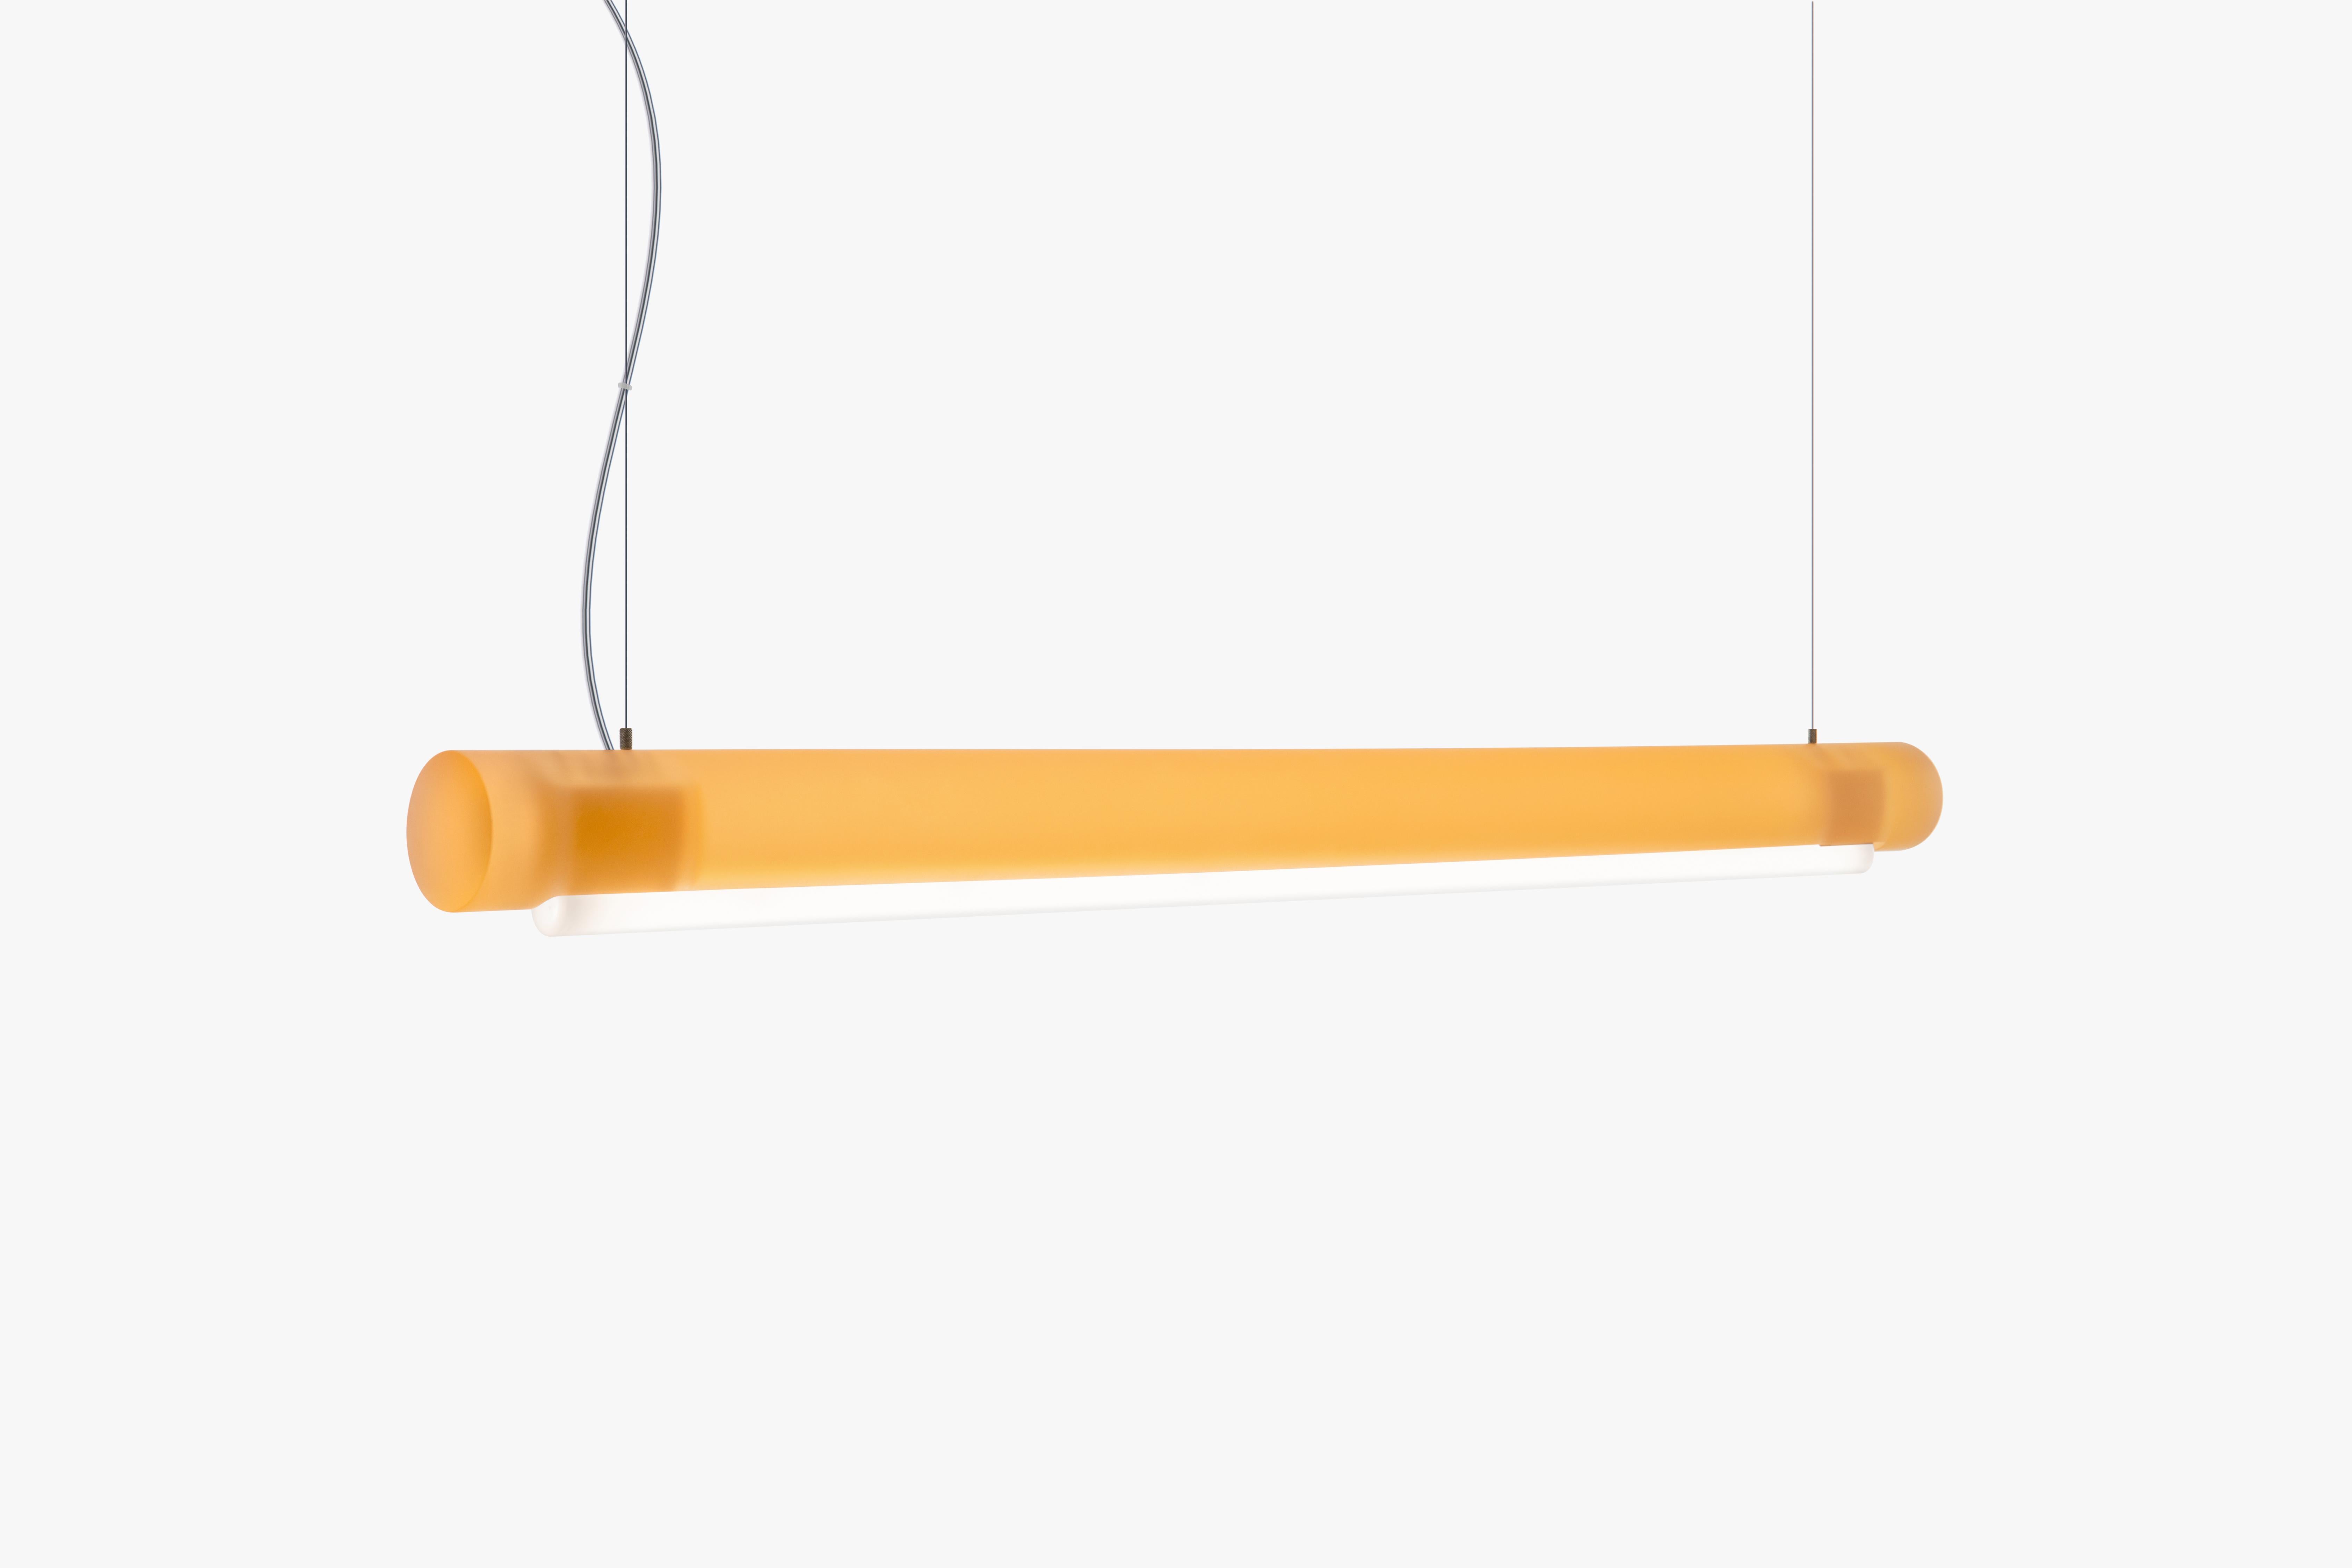 Harnessing Marcelis’ expertise in colour, the suspended cylinder bar of the Aura Light can stand alone or work as part of a grouping. Over a metre in length, the design is made from a bio-epoxy resin, created using by-products from farming. A